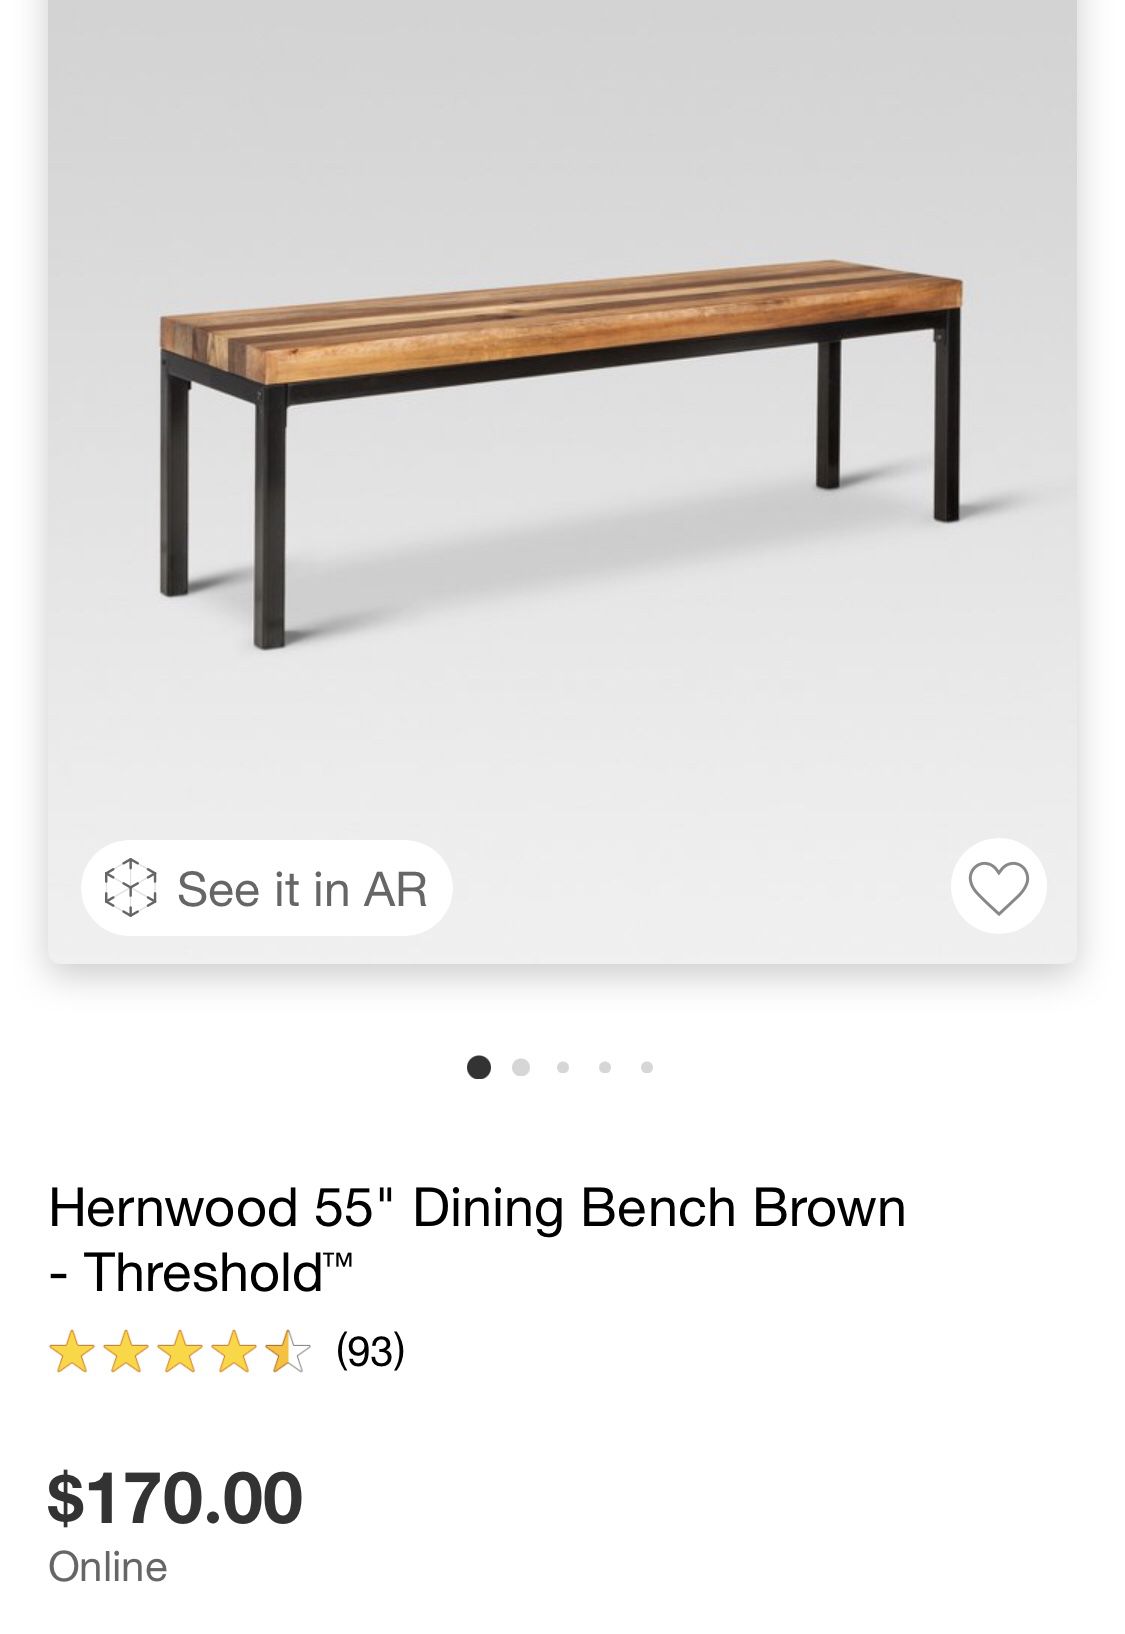 Dining Bench From Target